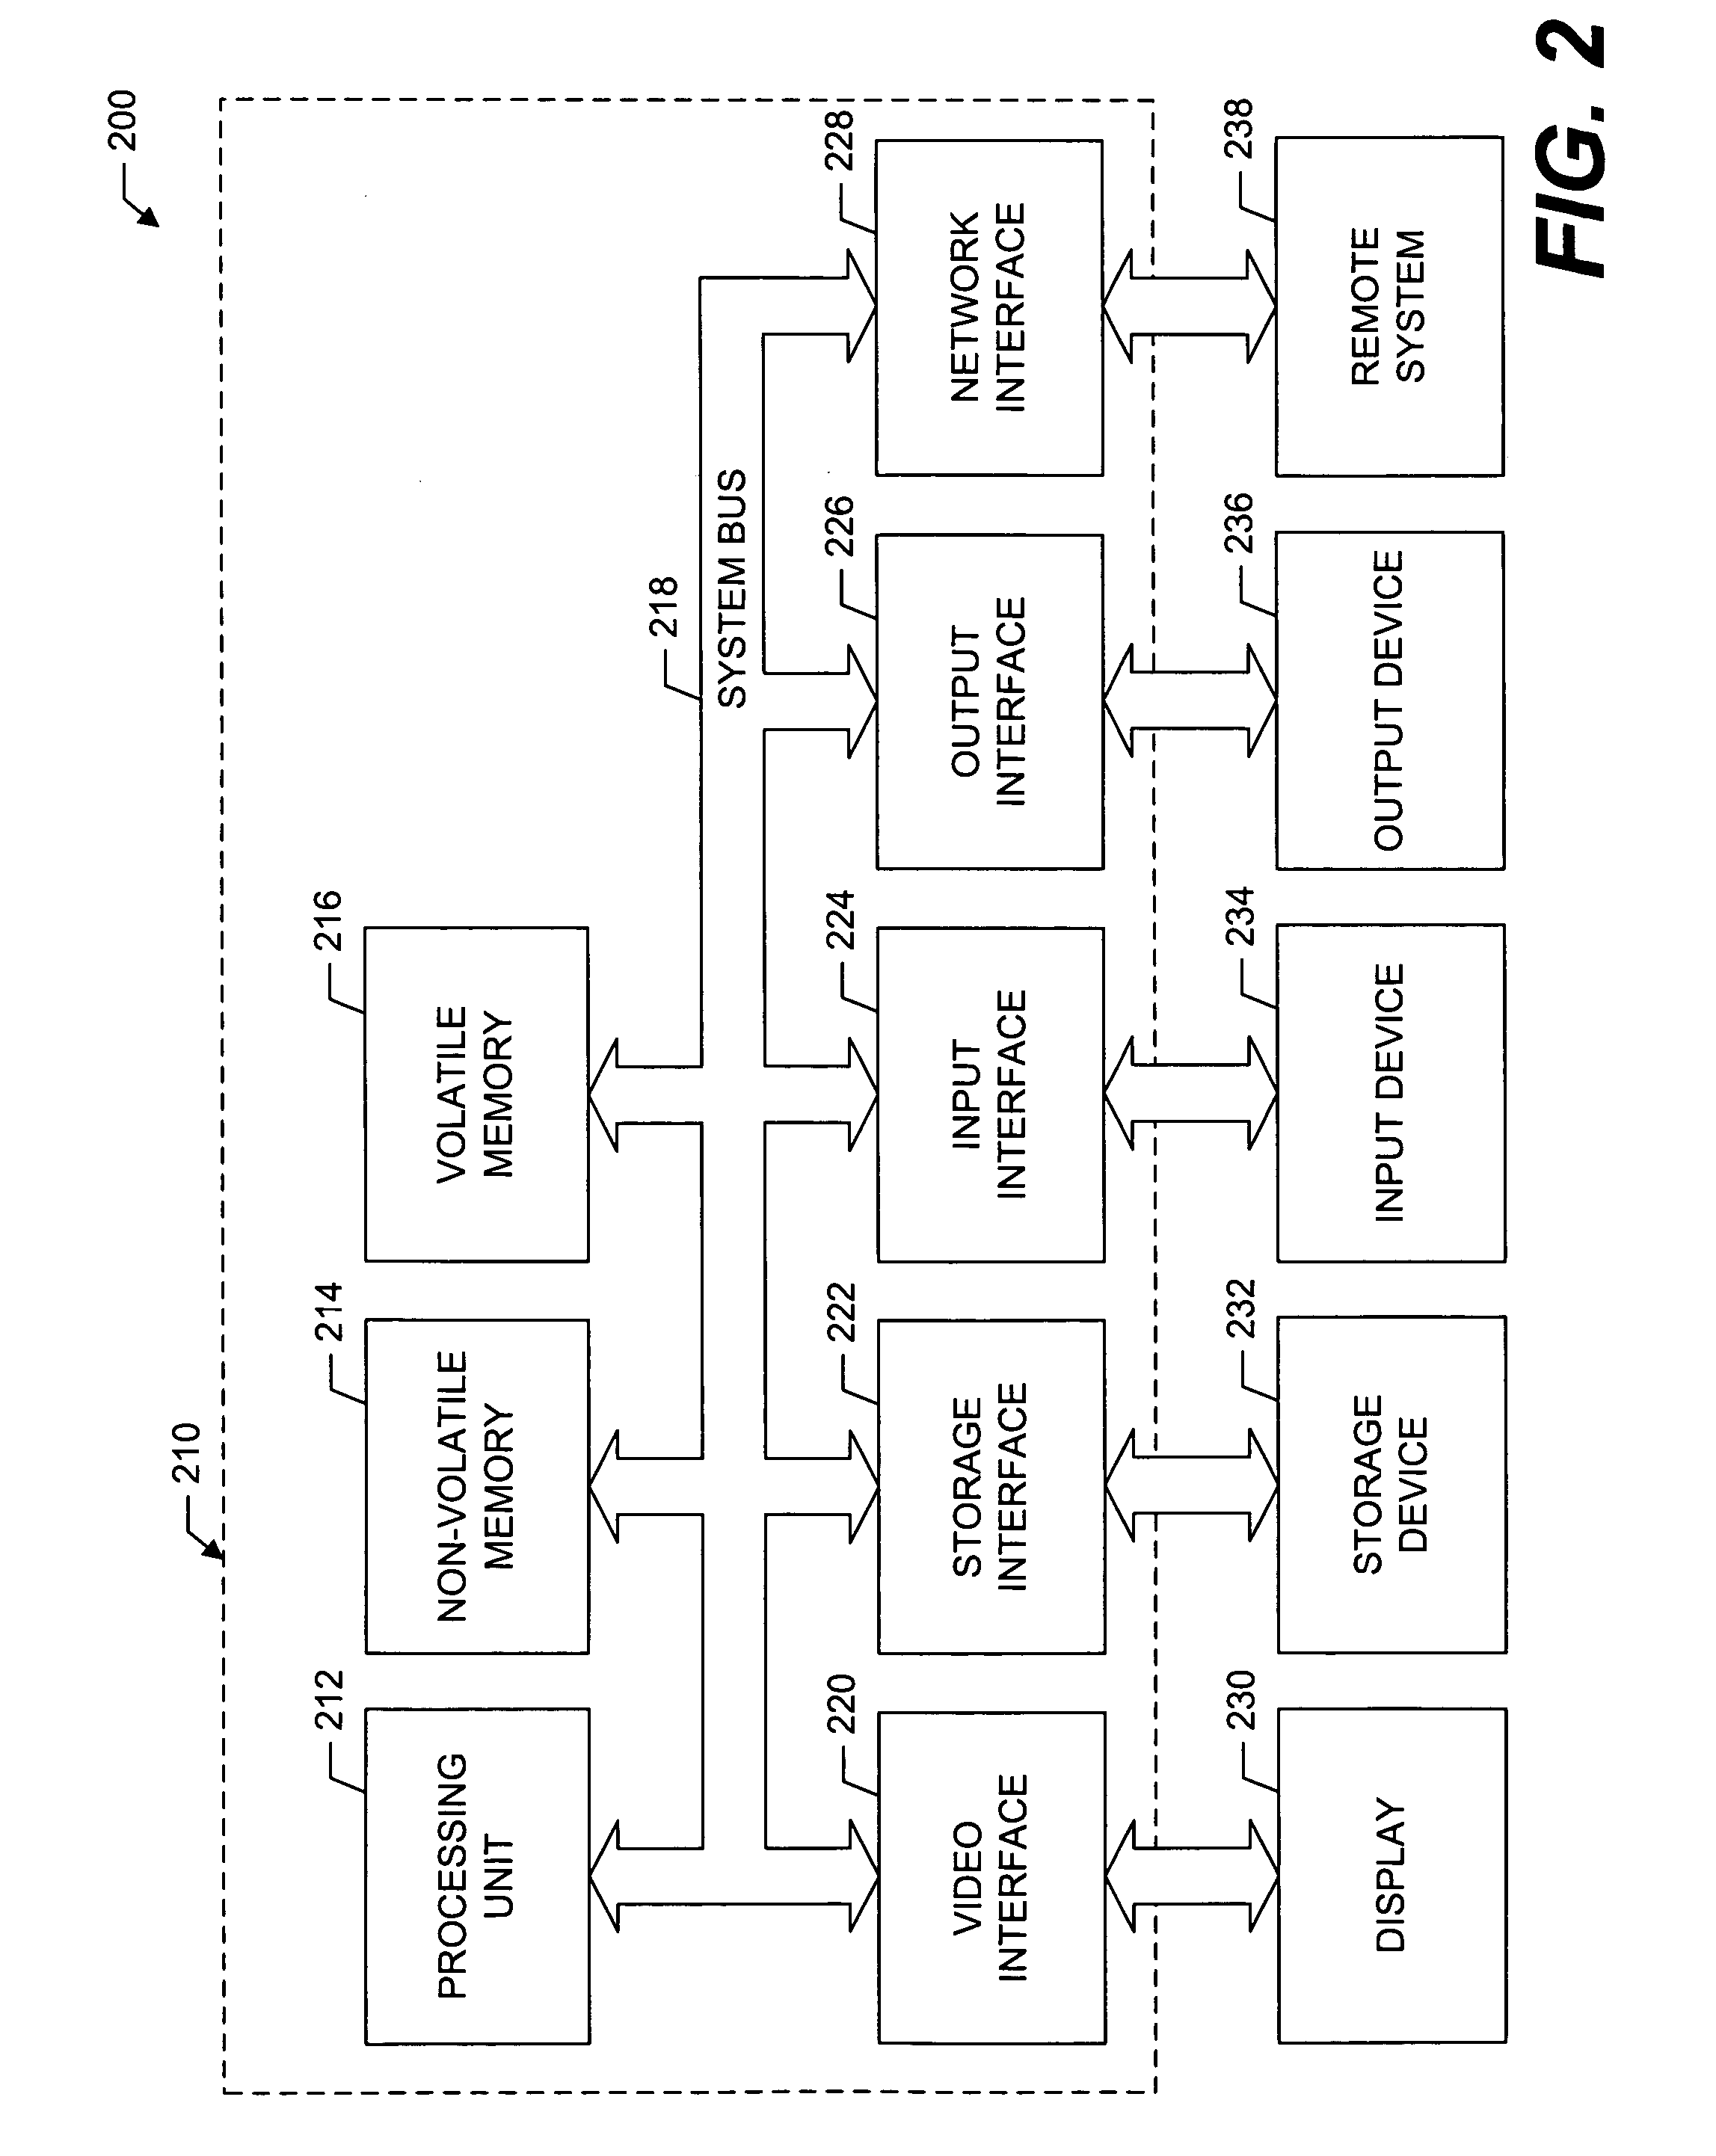 System and methods for facilitating a linear grid database with data organization by dimension